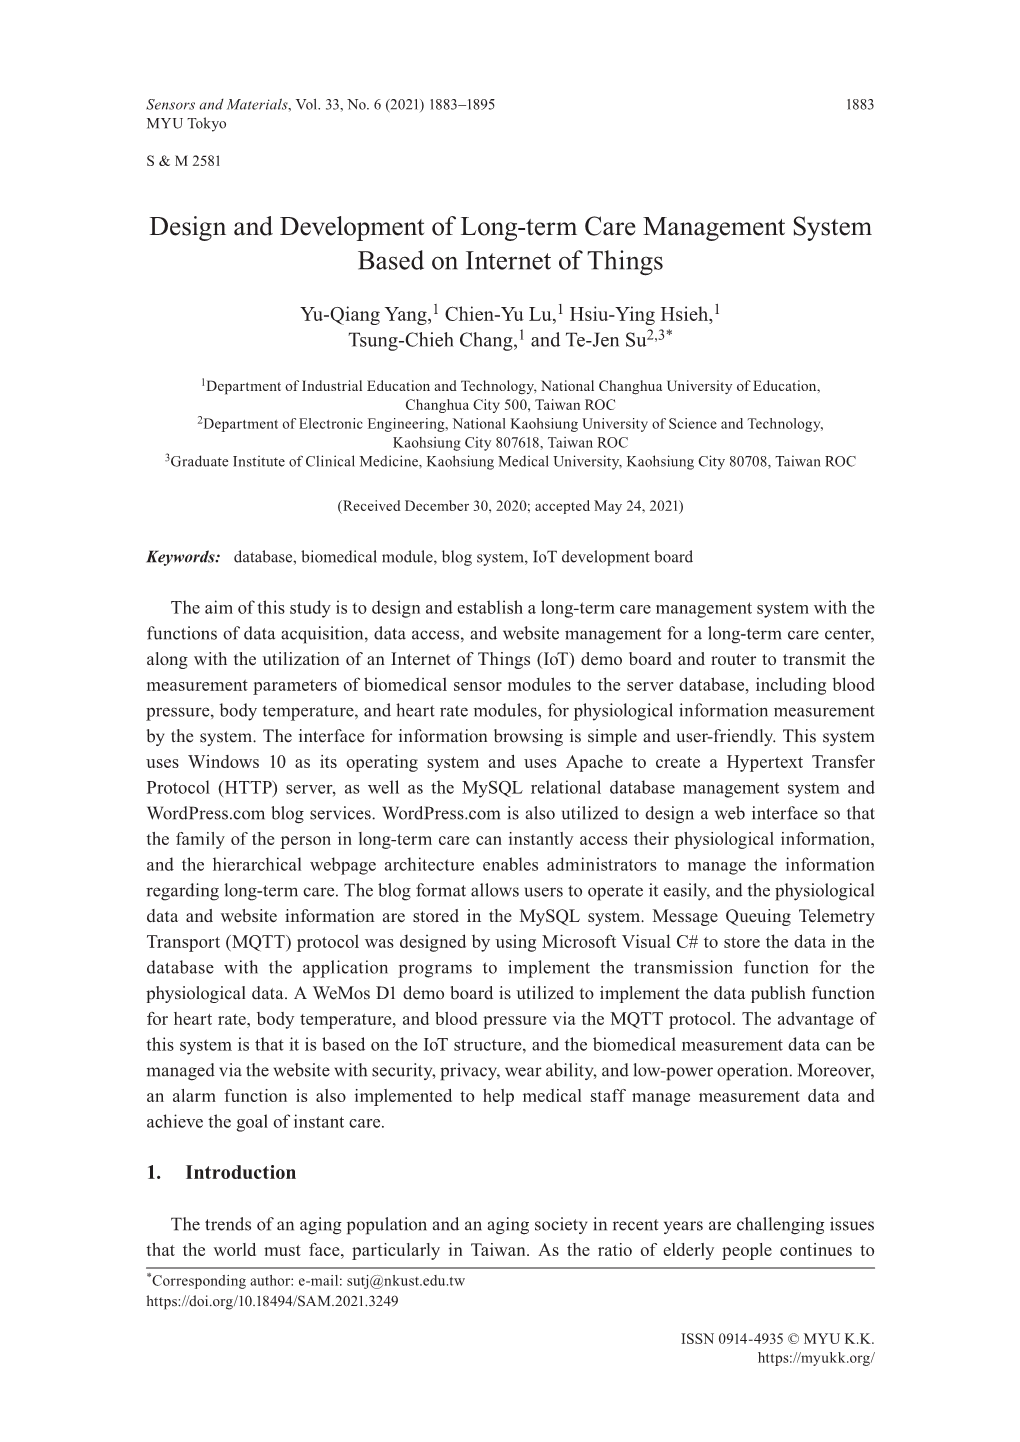 Design and Development of Long-Term Care Management System Based on Internet of Things